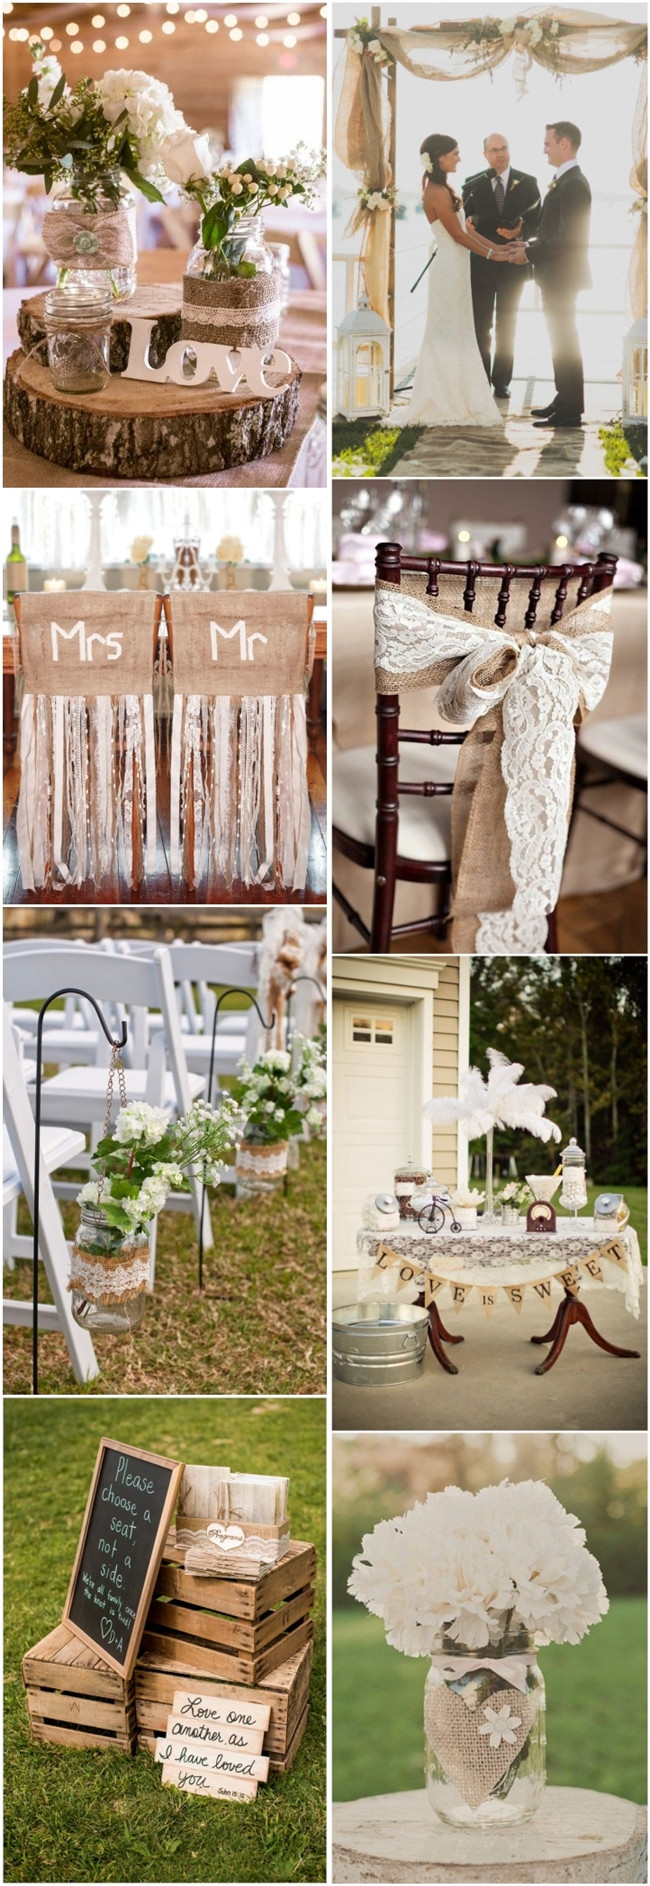 Lace Wedding Decorations
 45 Chic Rustic Burlap & Lace Wedding Ideas and Inspiration